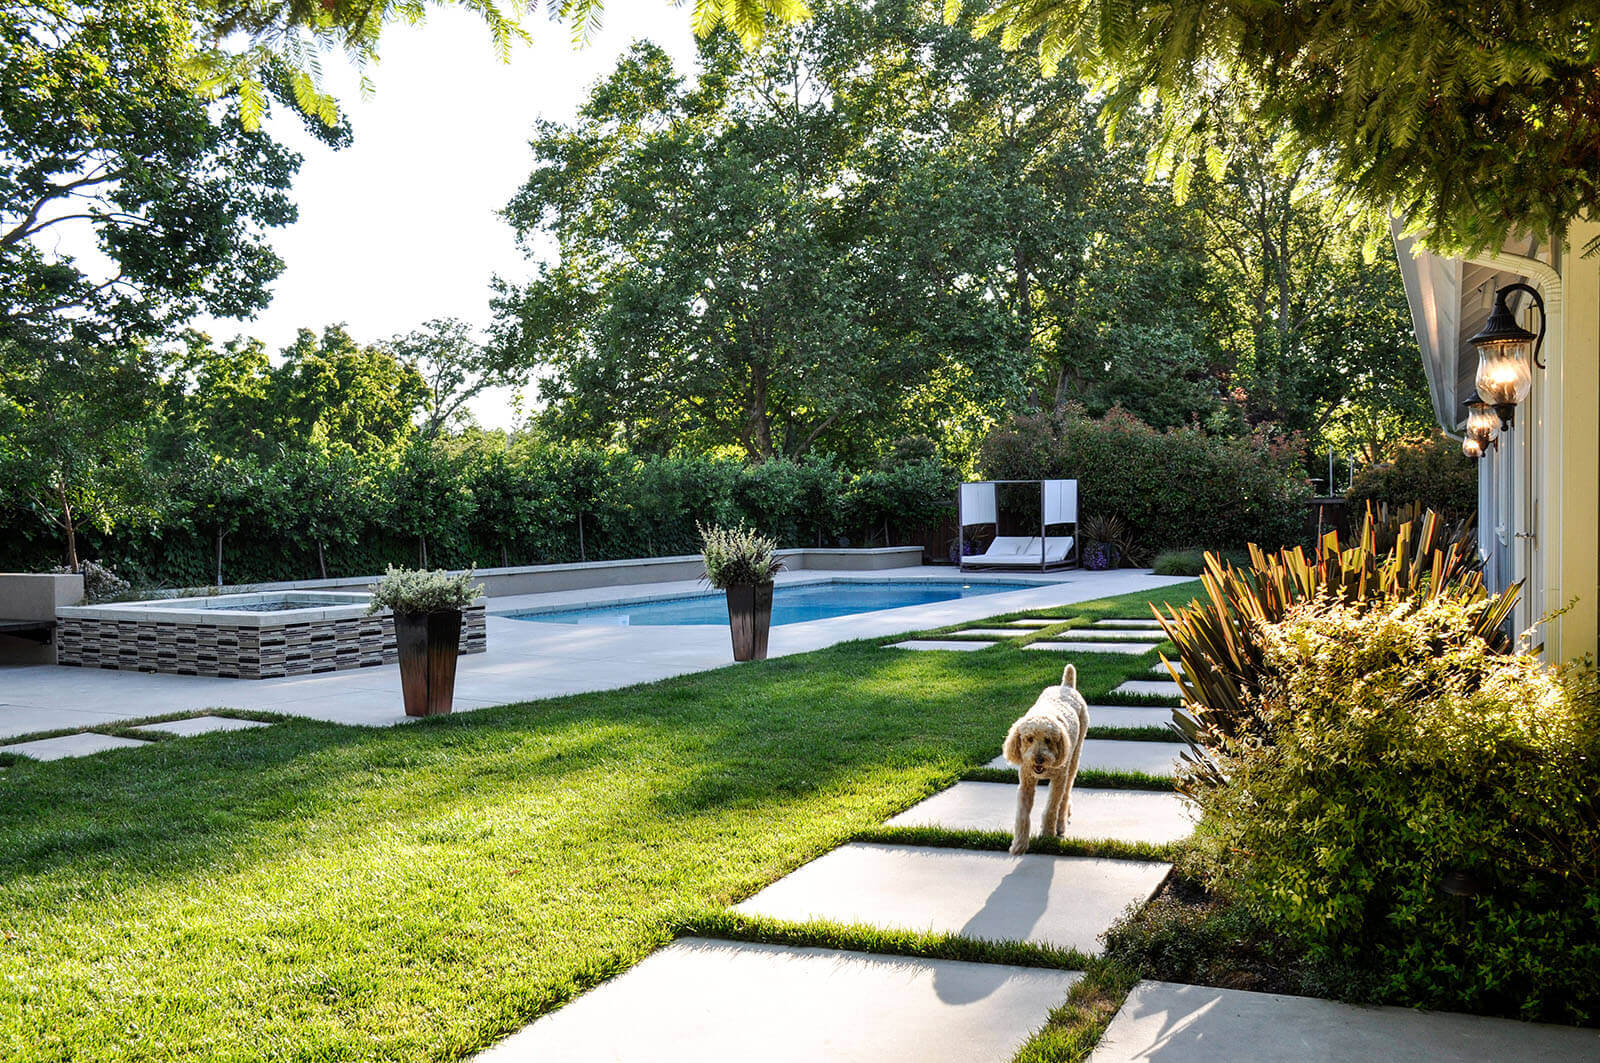 Stone tile on medium grass, with stone tile patio and pool deck